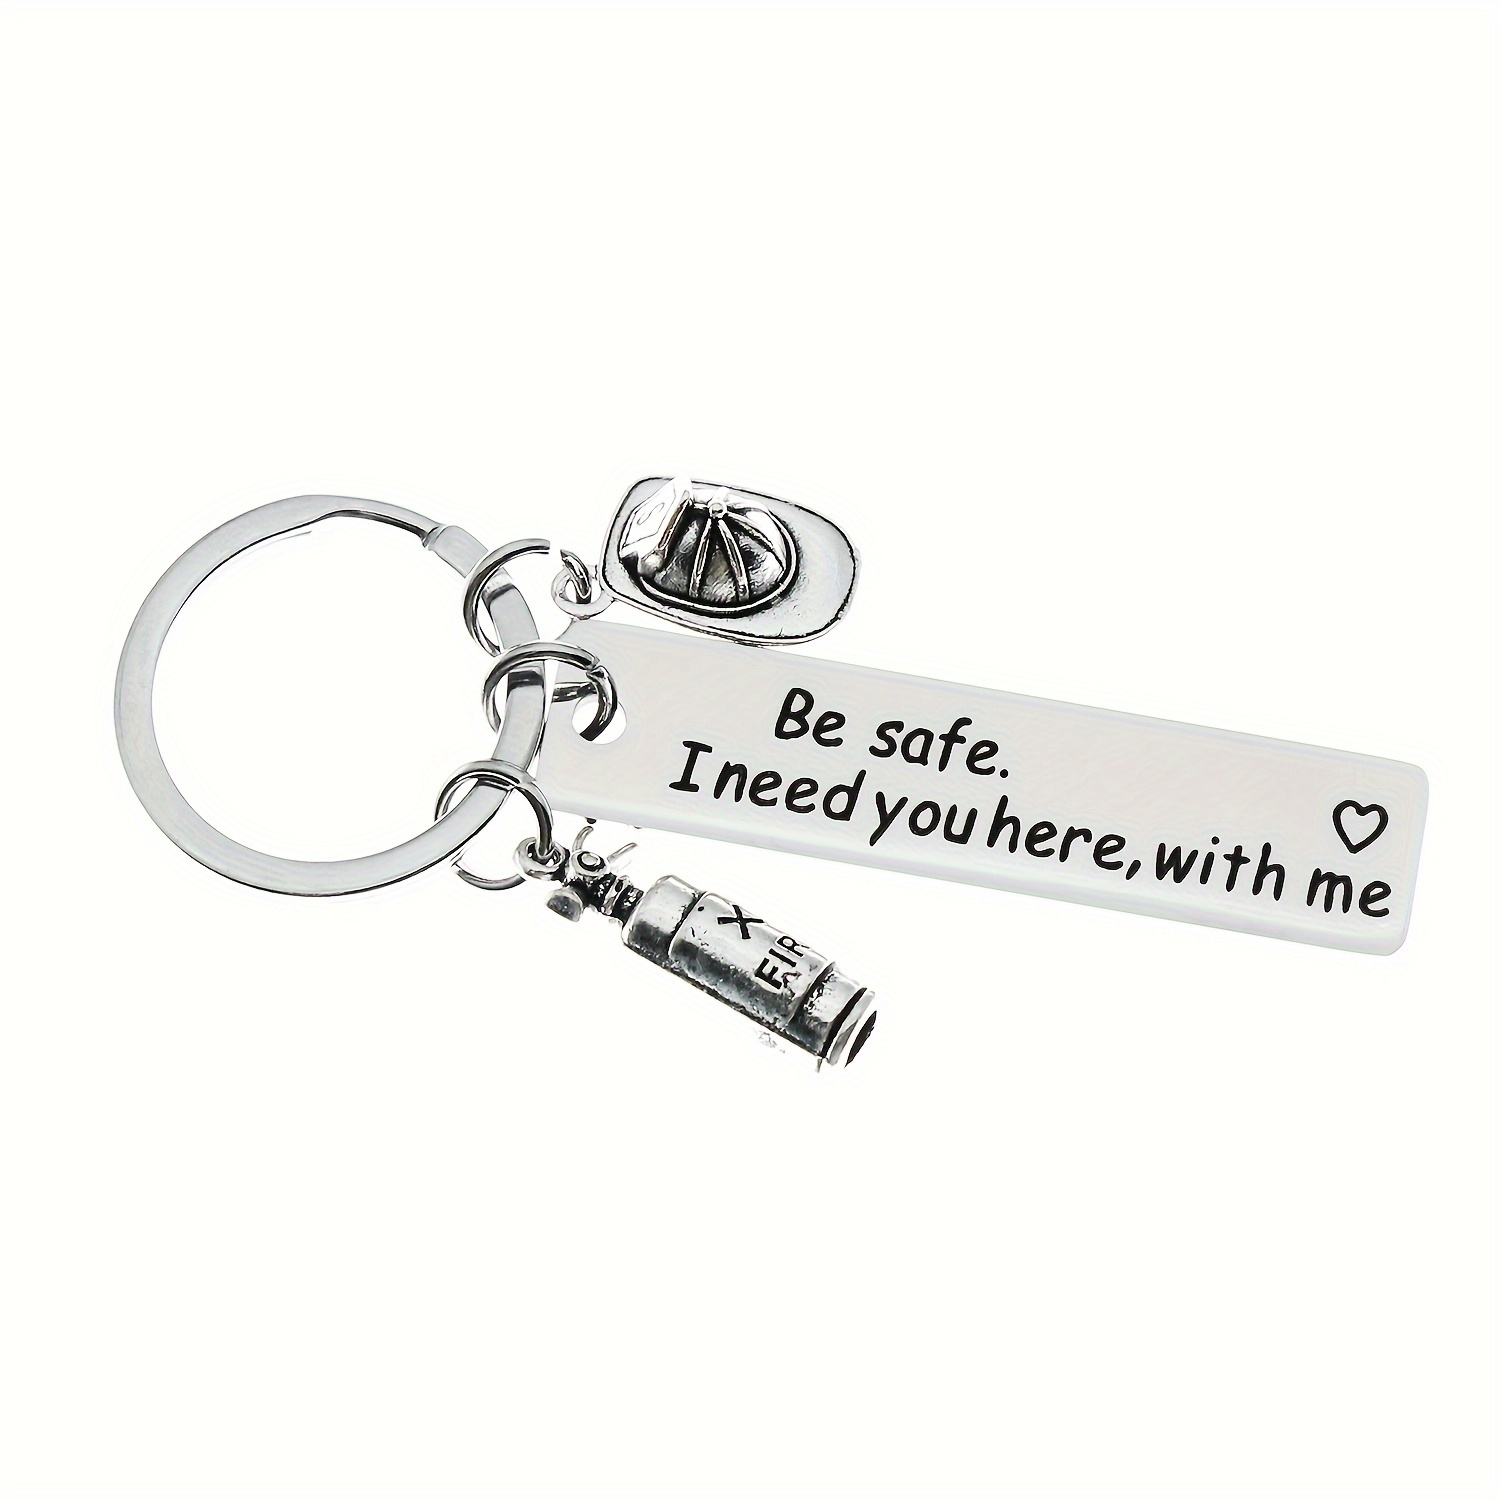 Police/Firefighter/Military Keychain - Be Safe I Need You Here With Me -  Purple Pelican Designs